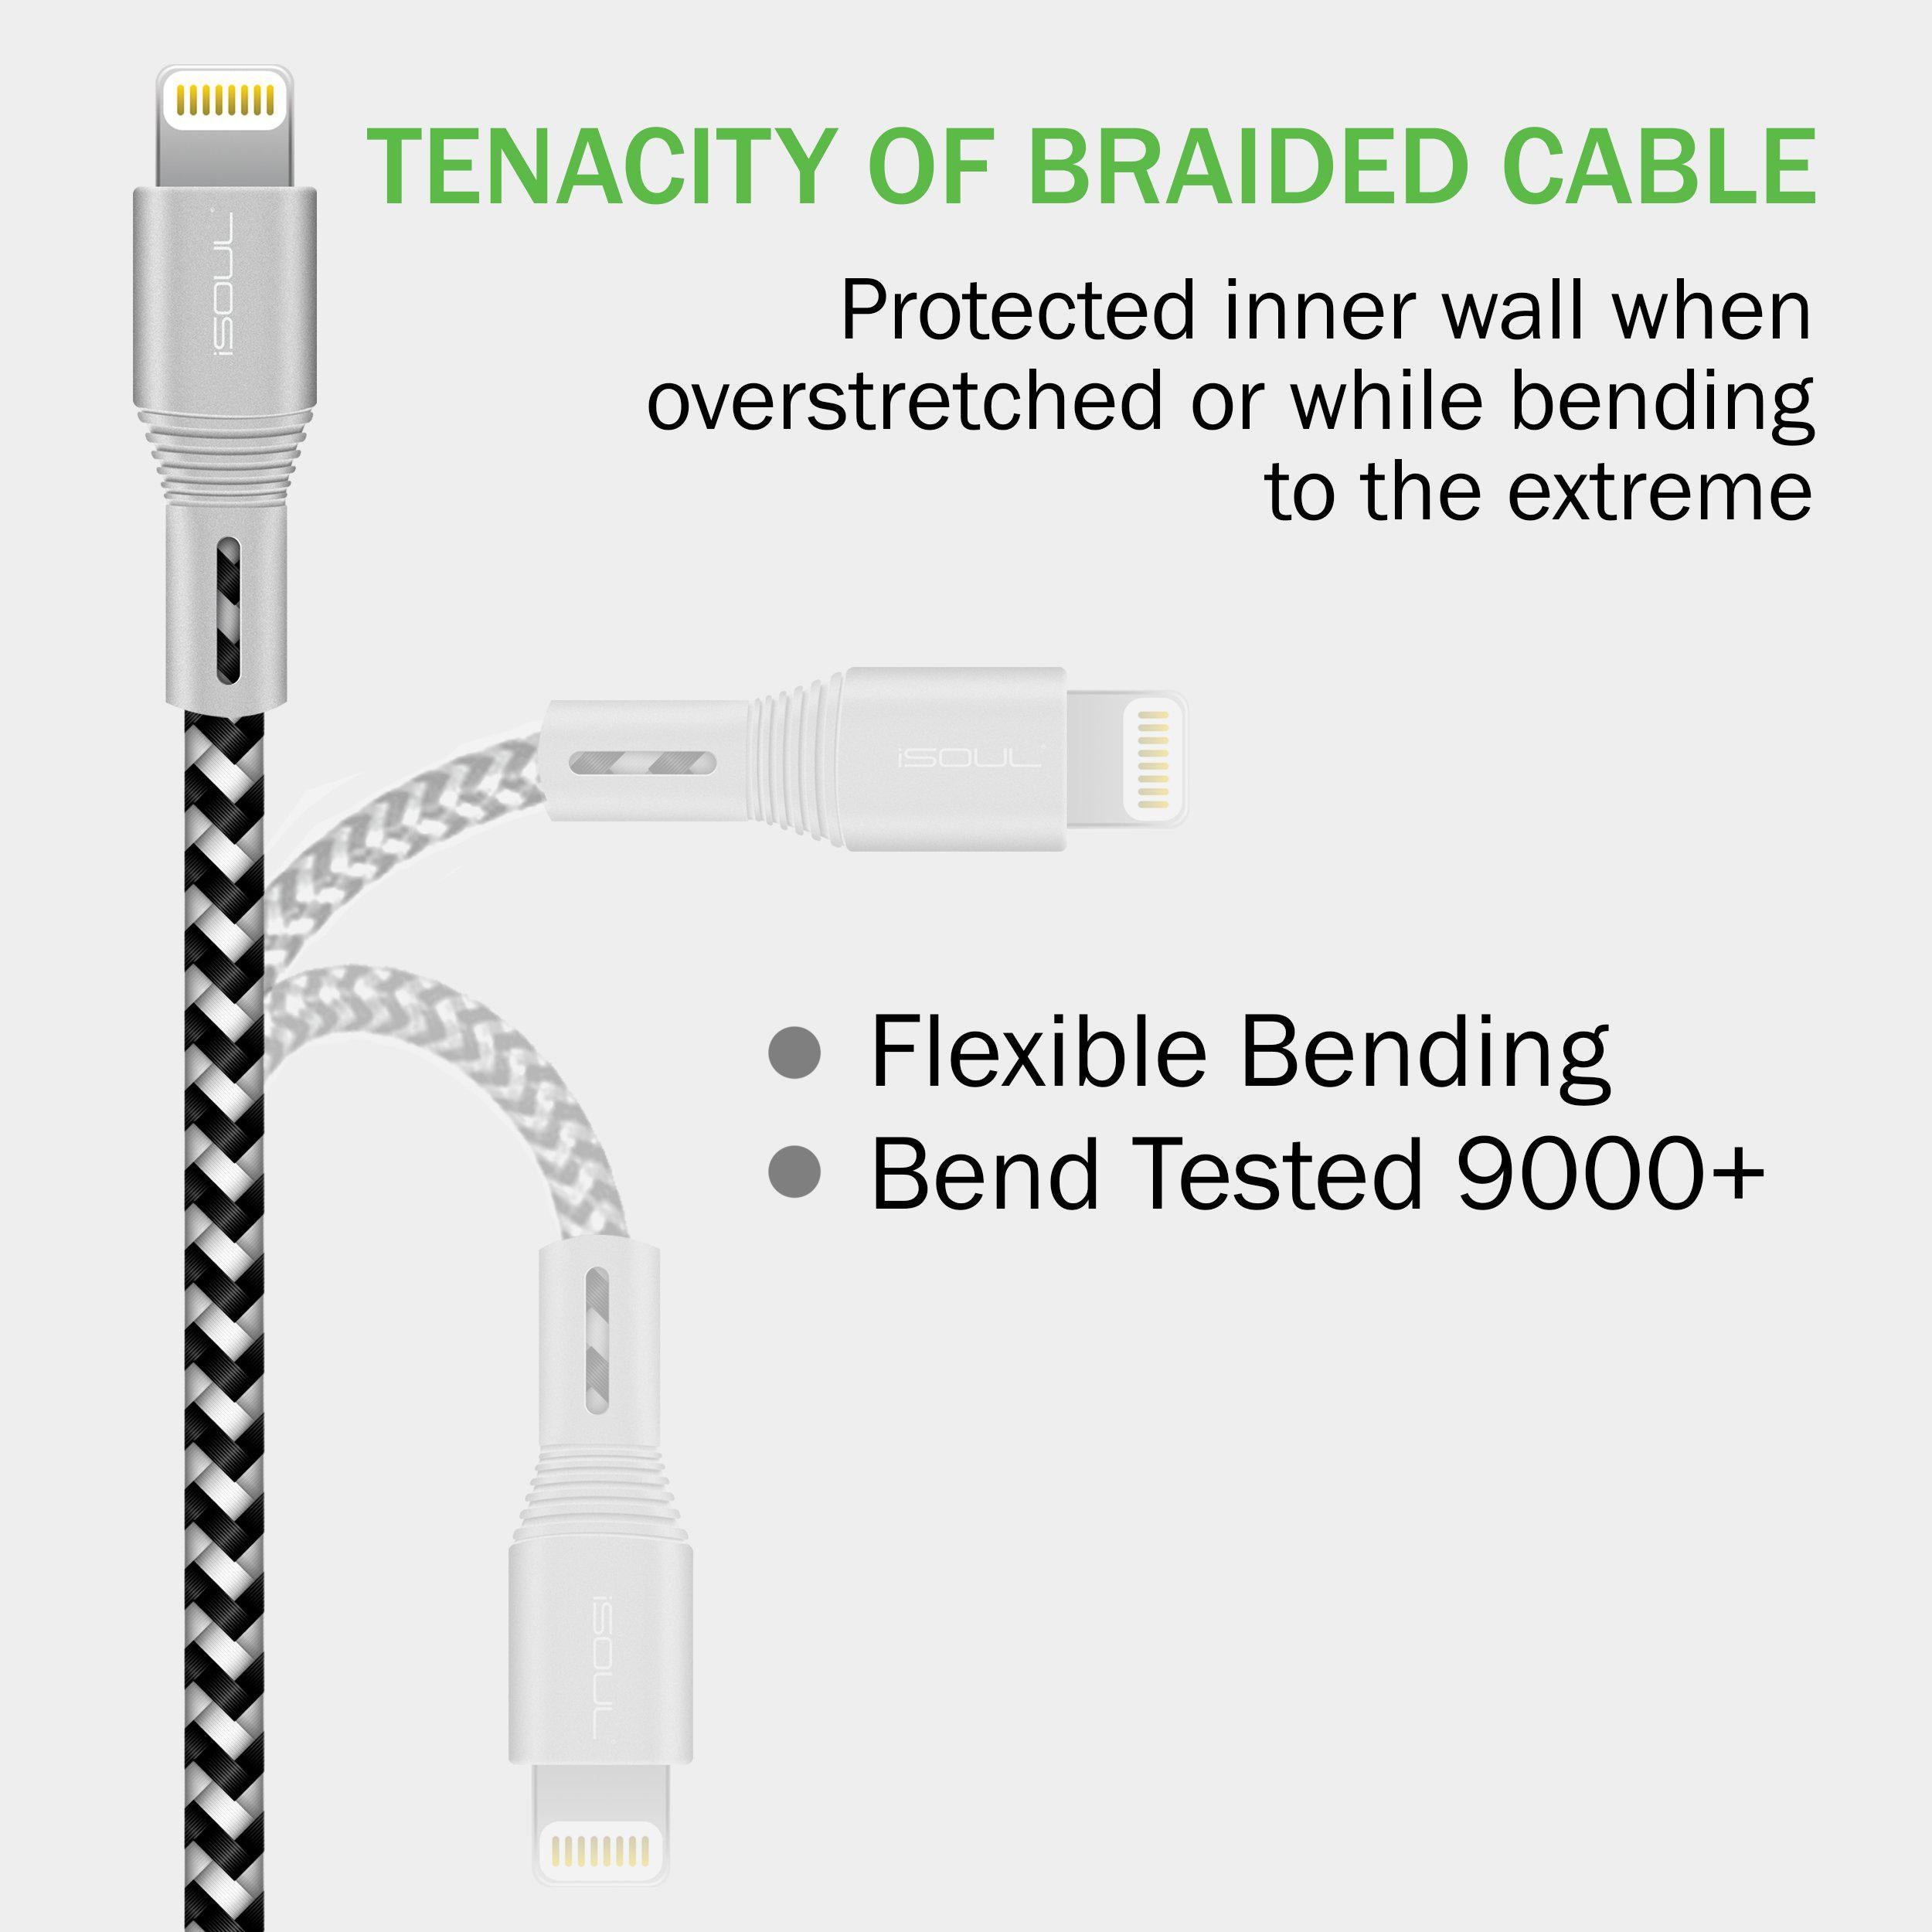 iSOUL Lightning iPhone Charger Data Cable - [Apple MFi Certified] 15cm / 1M / 2M Long Nylon Braided Lead USB Fast Charge Sync - iSOUL